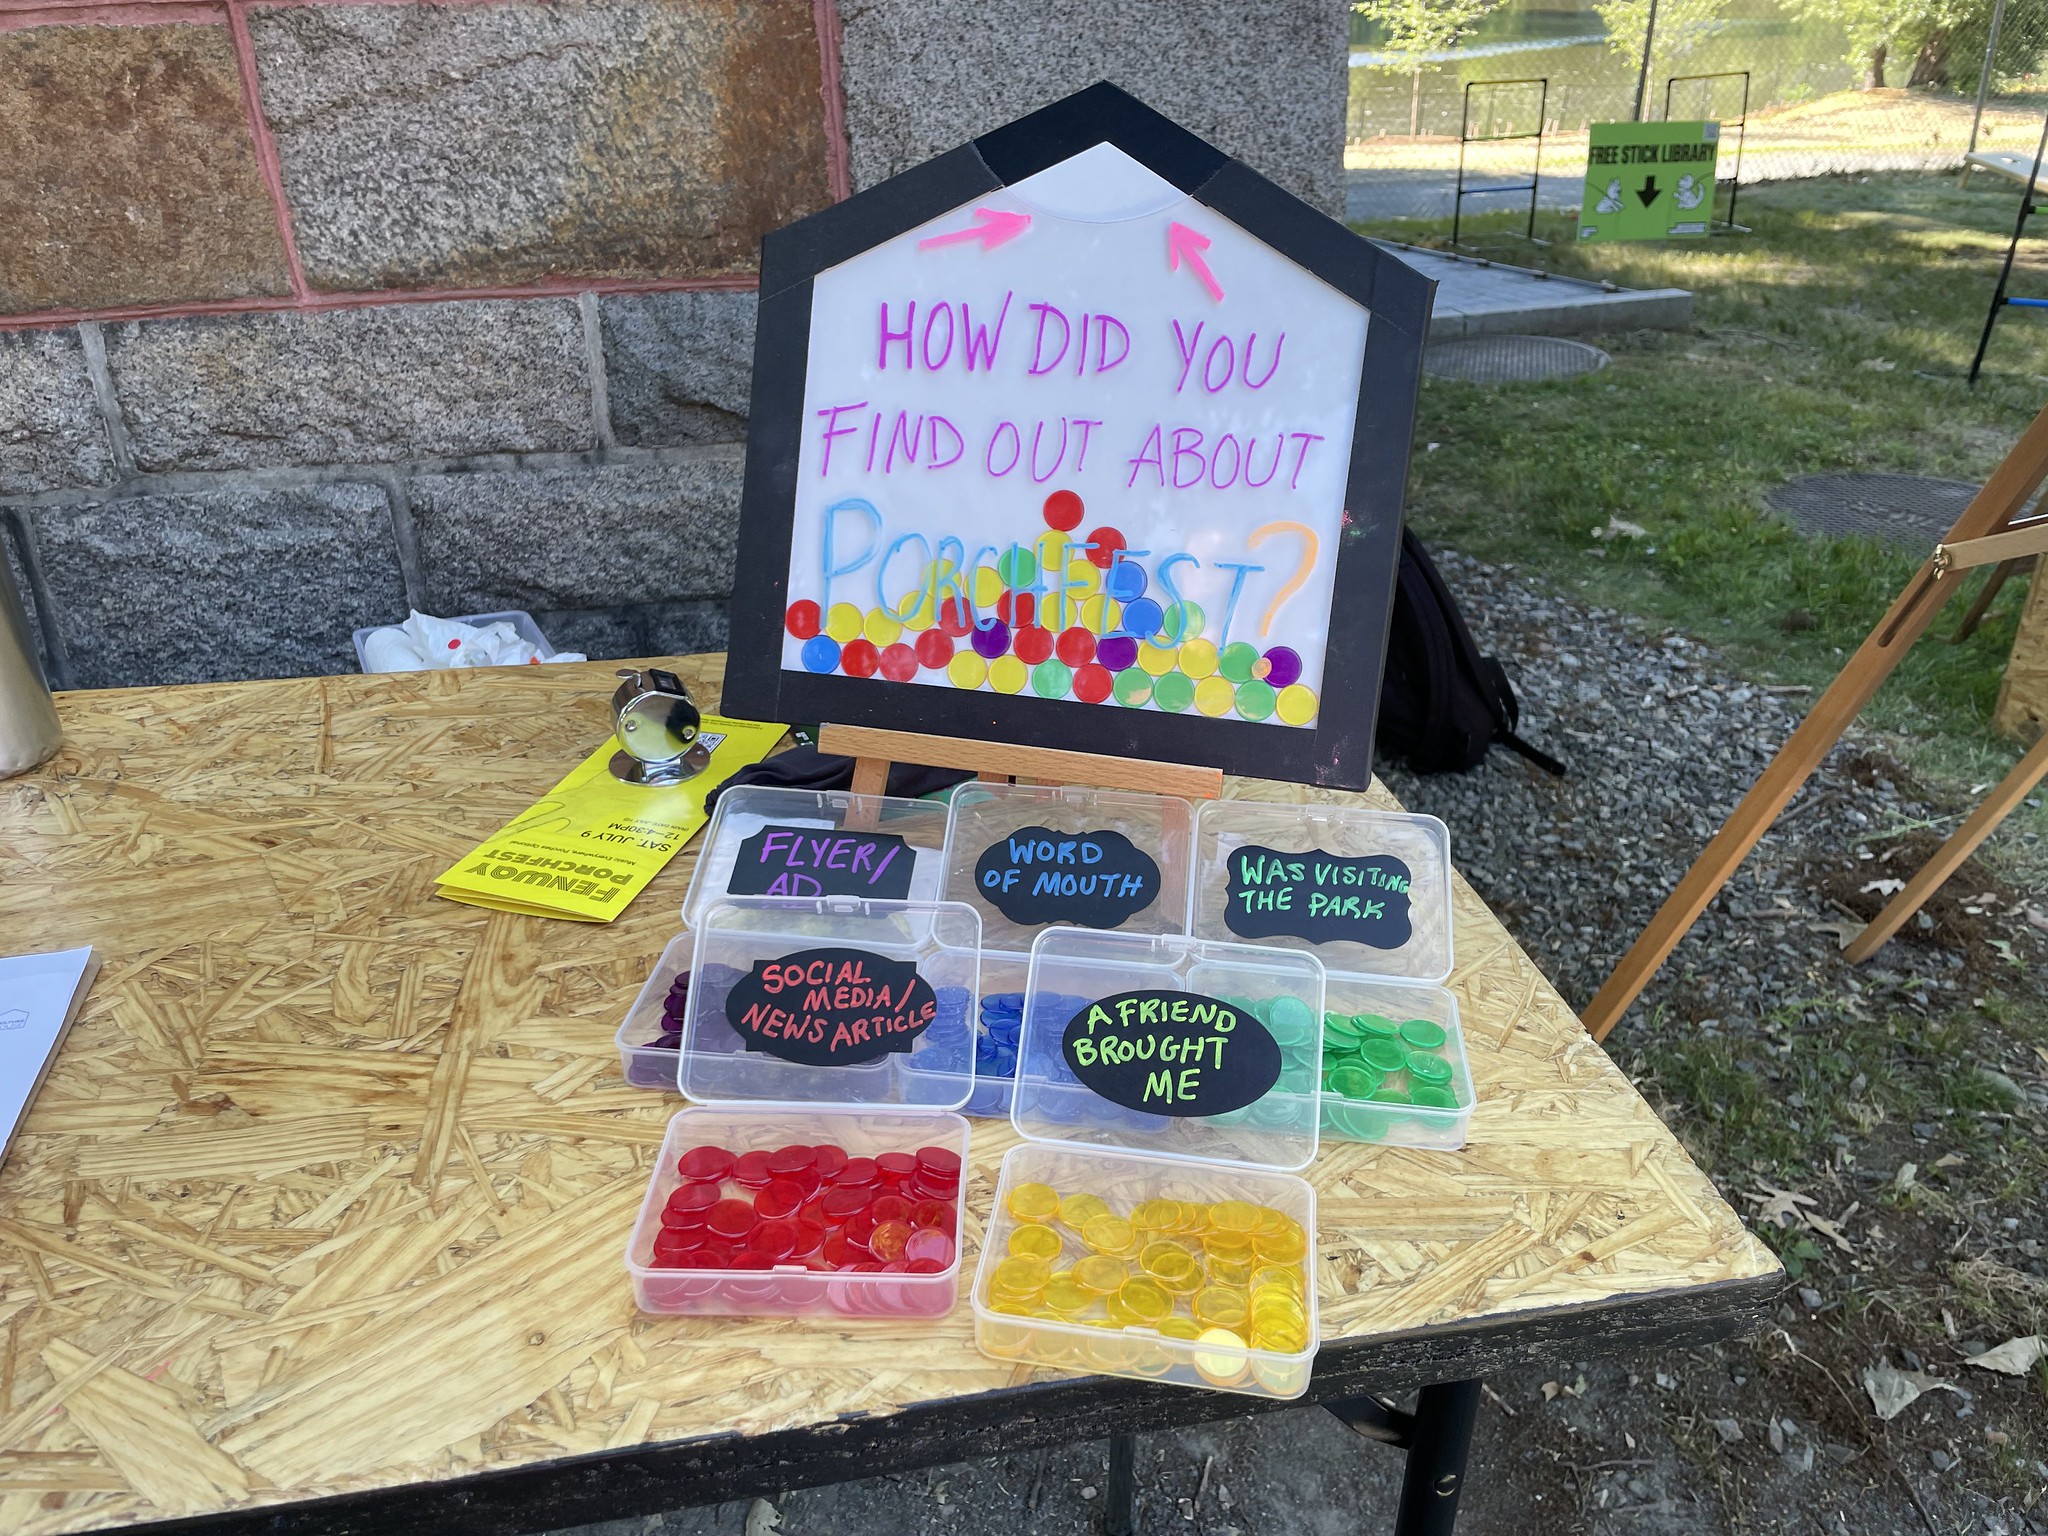 Data collection tool reading how did you find out about Porchfest? with multicolored chips to answer the question